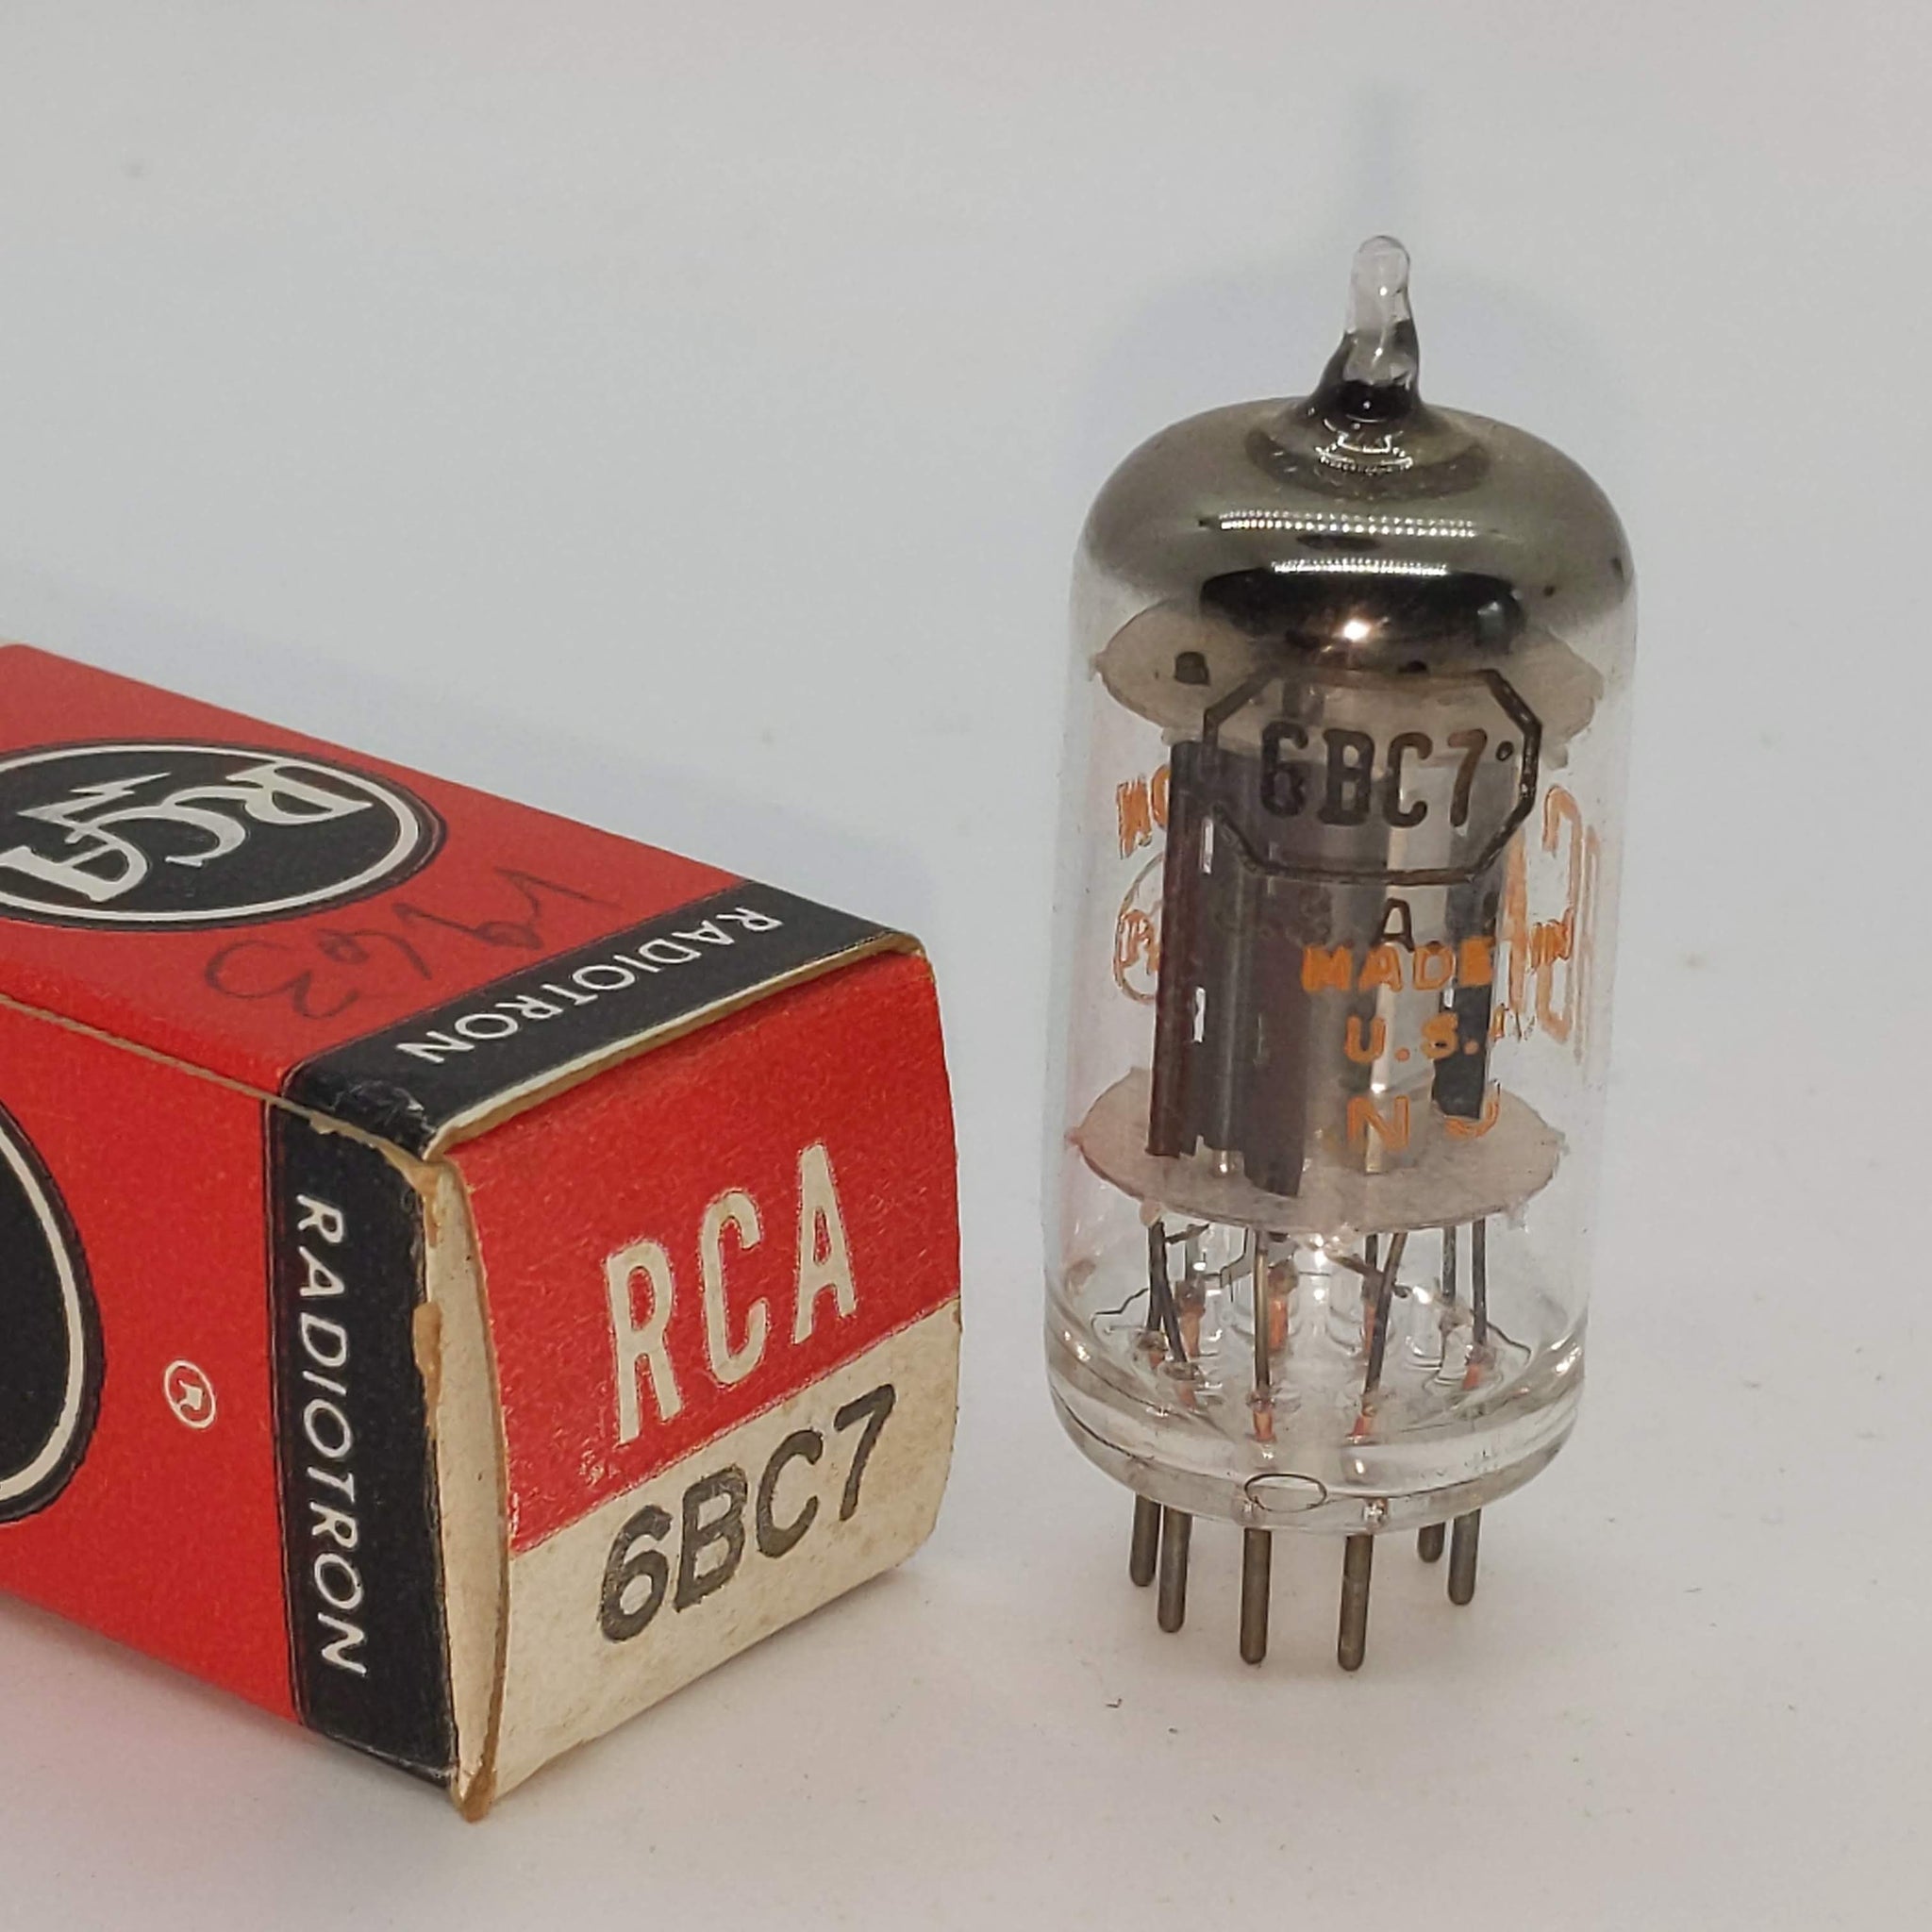 RCA 6BC7 Tube NOS, All 3 Tests Good On Hickok